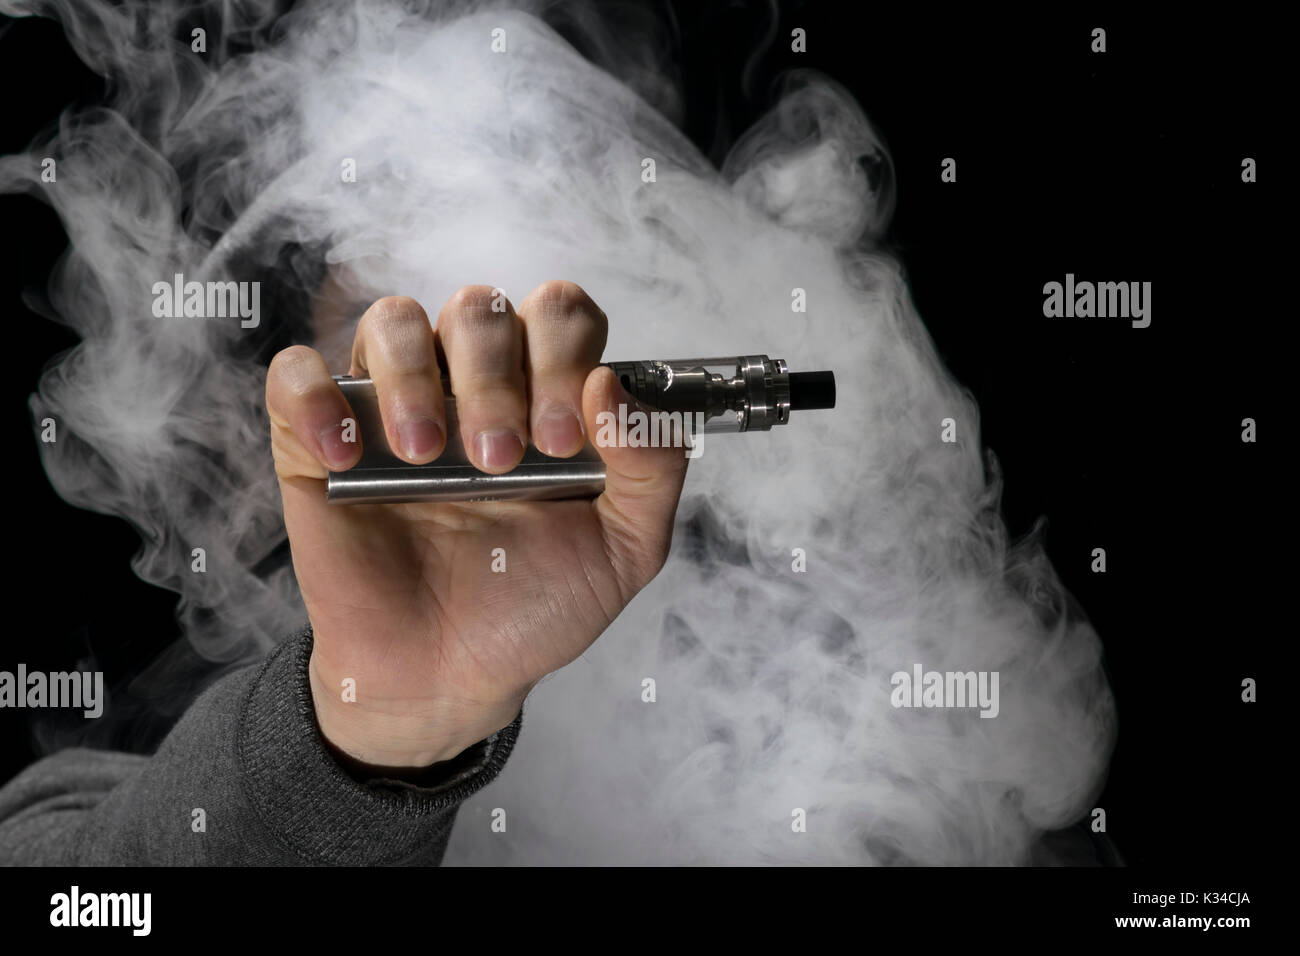 young man vaping electronic cigarette, holding a vape device with ...